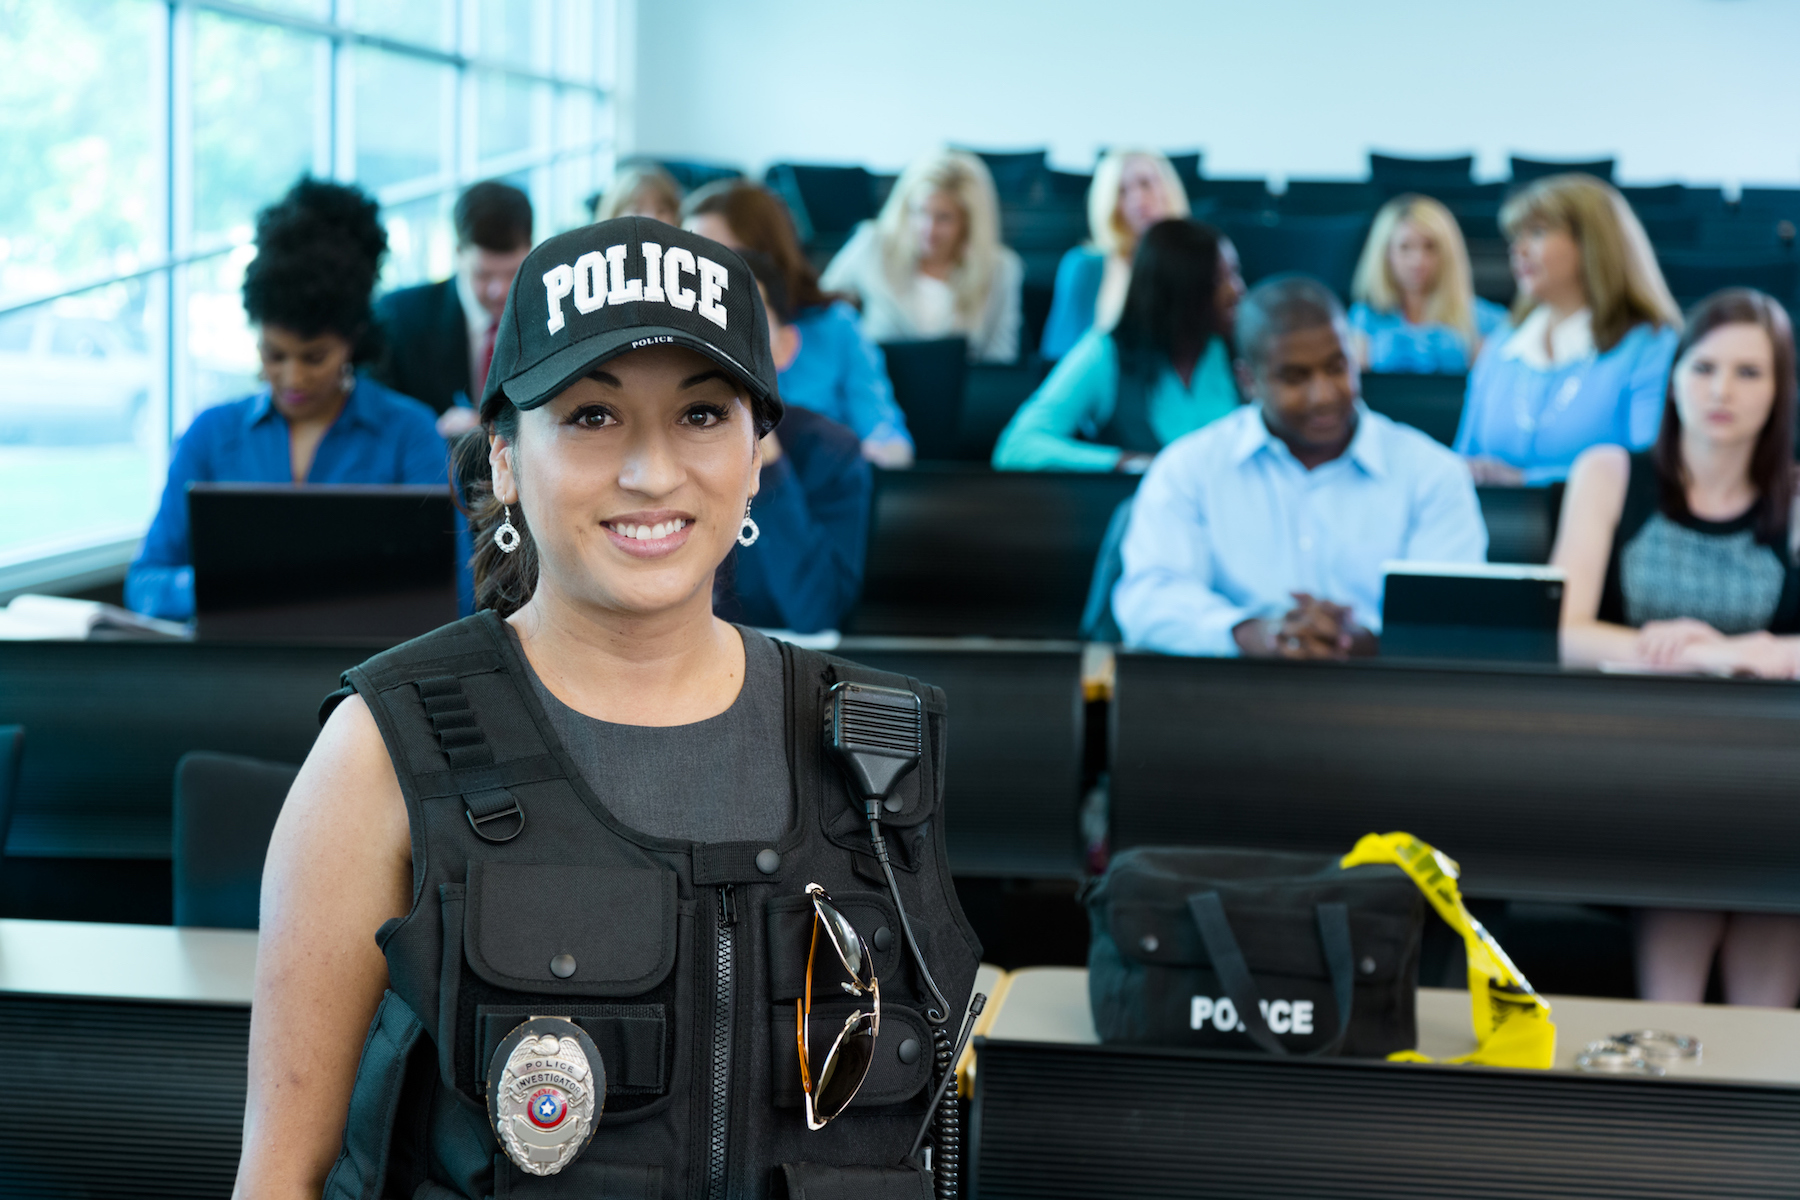 Female police officer in front of classroom